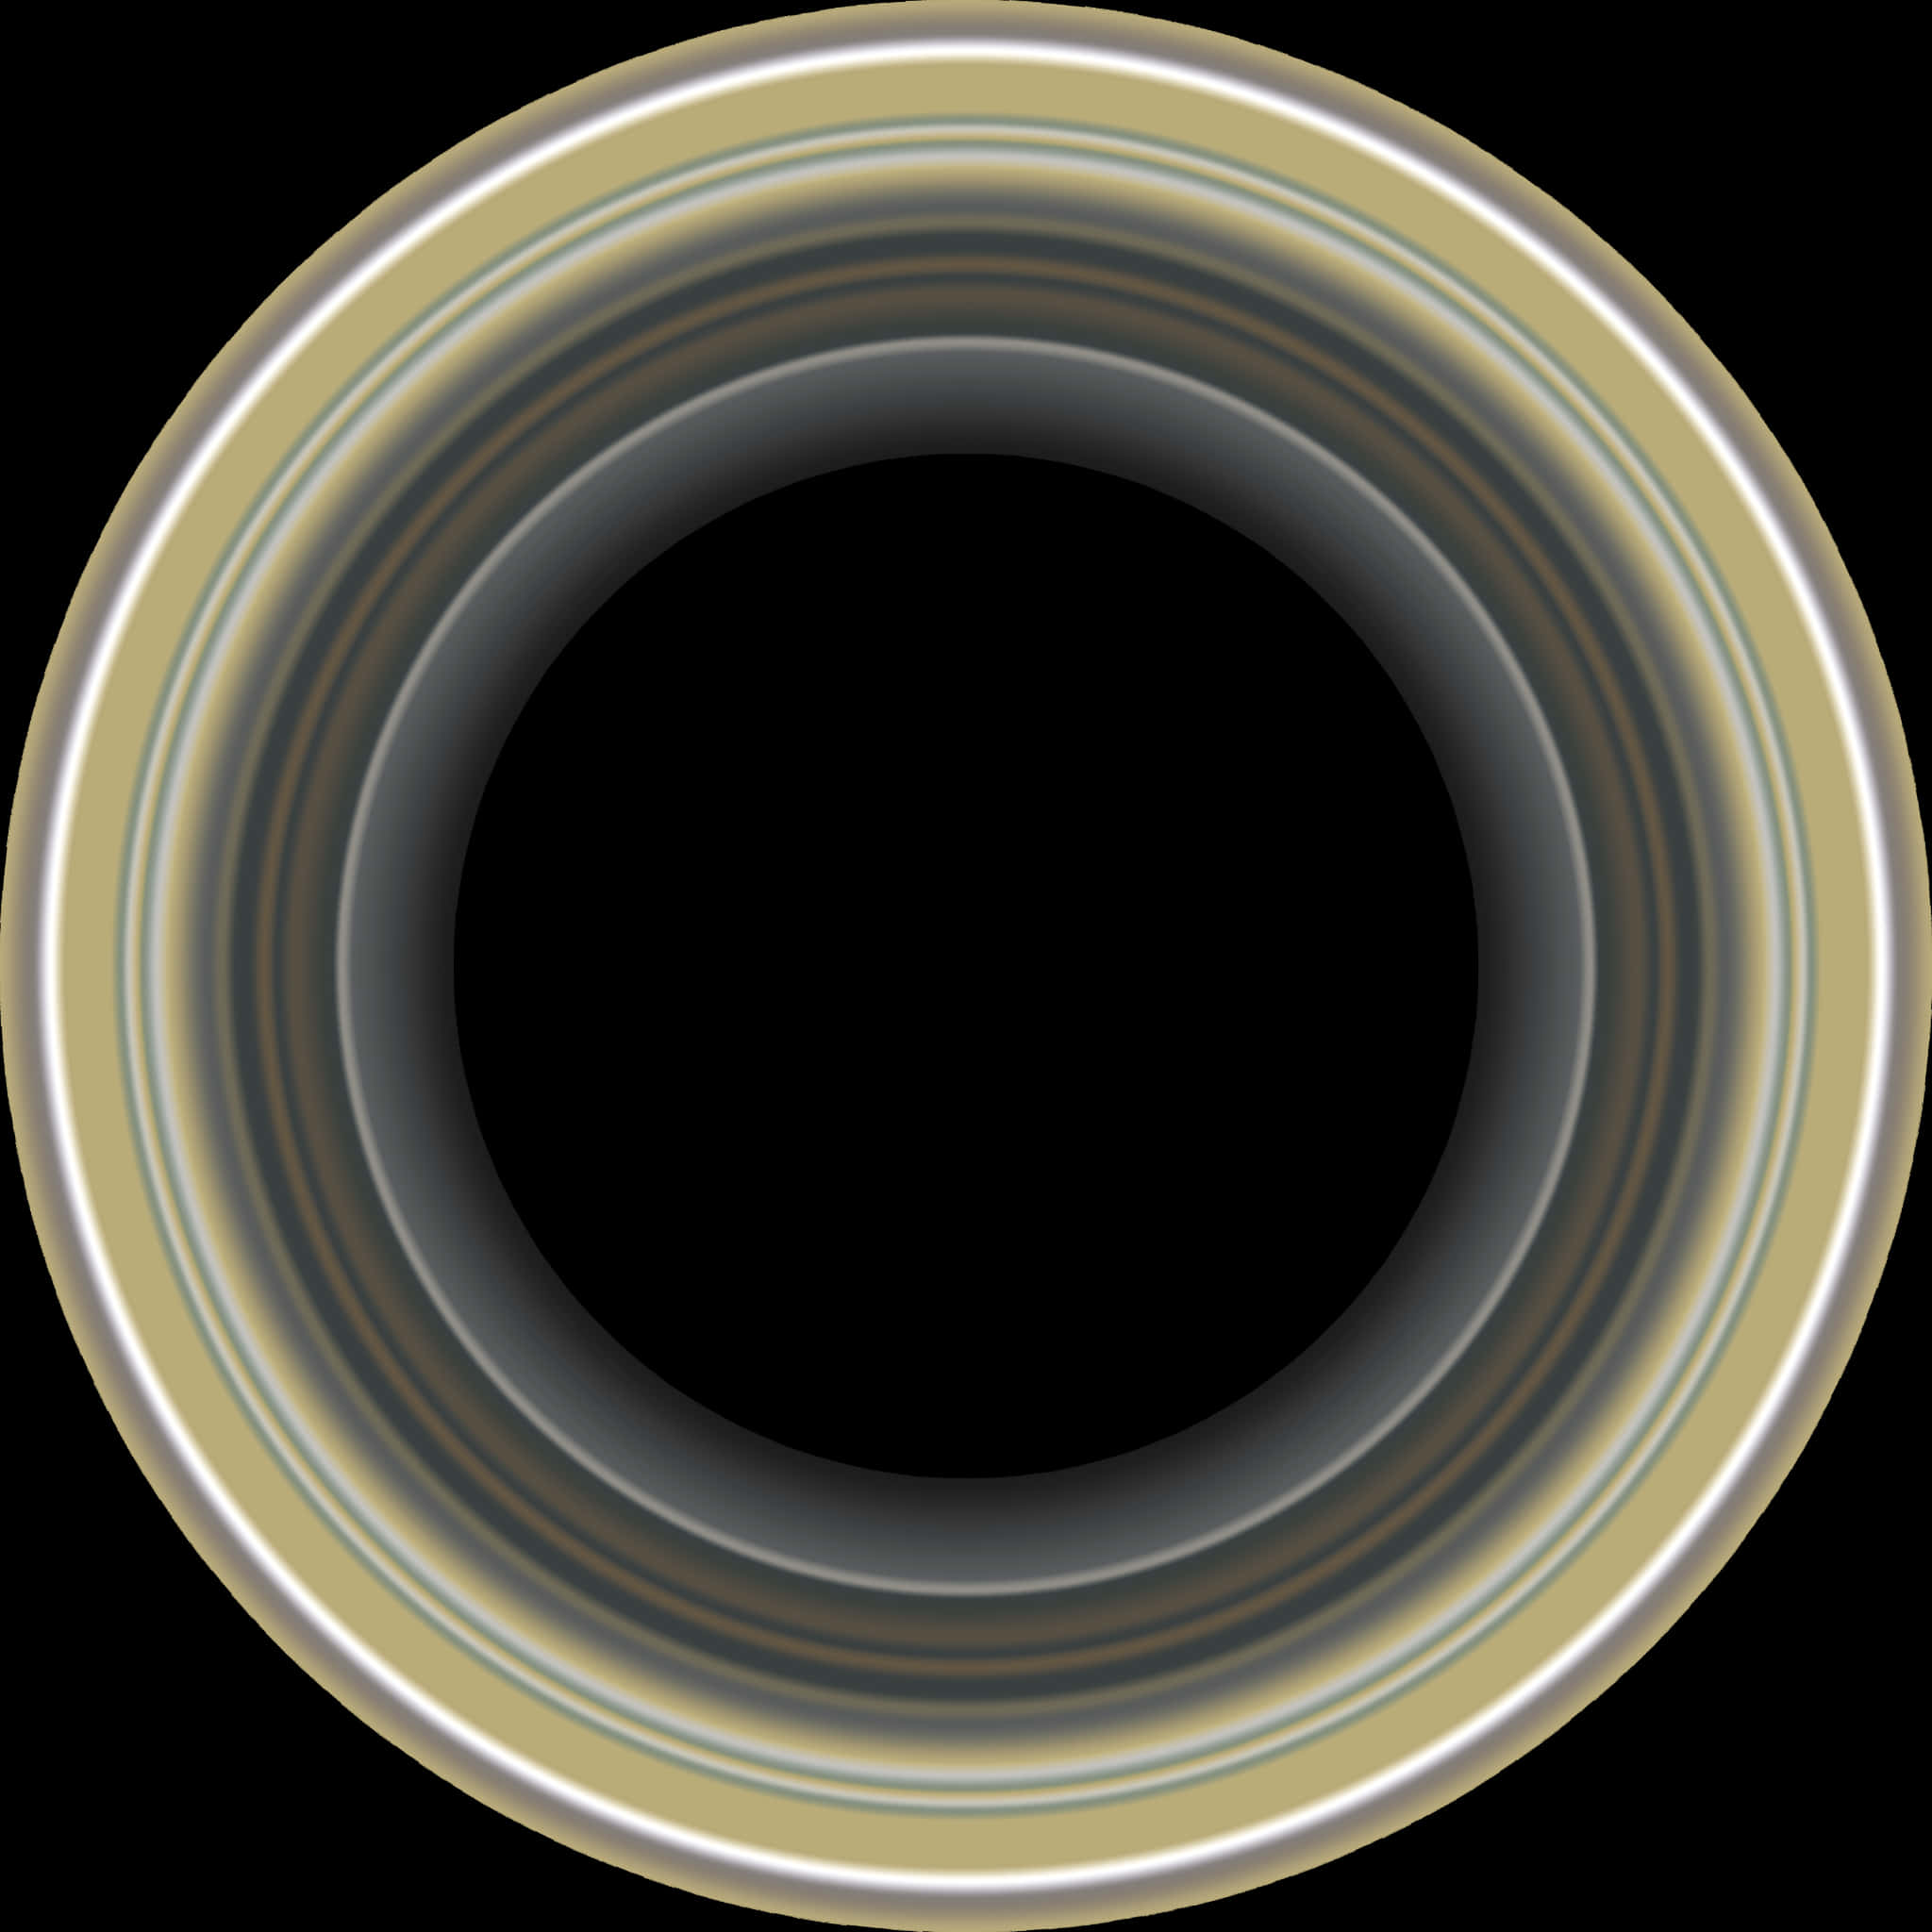 A Circular Object With A Black Background